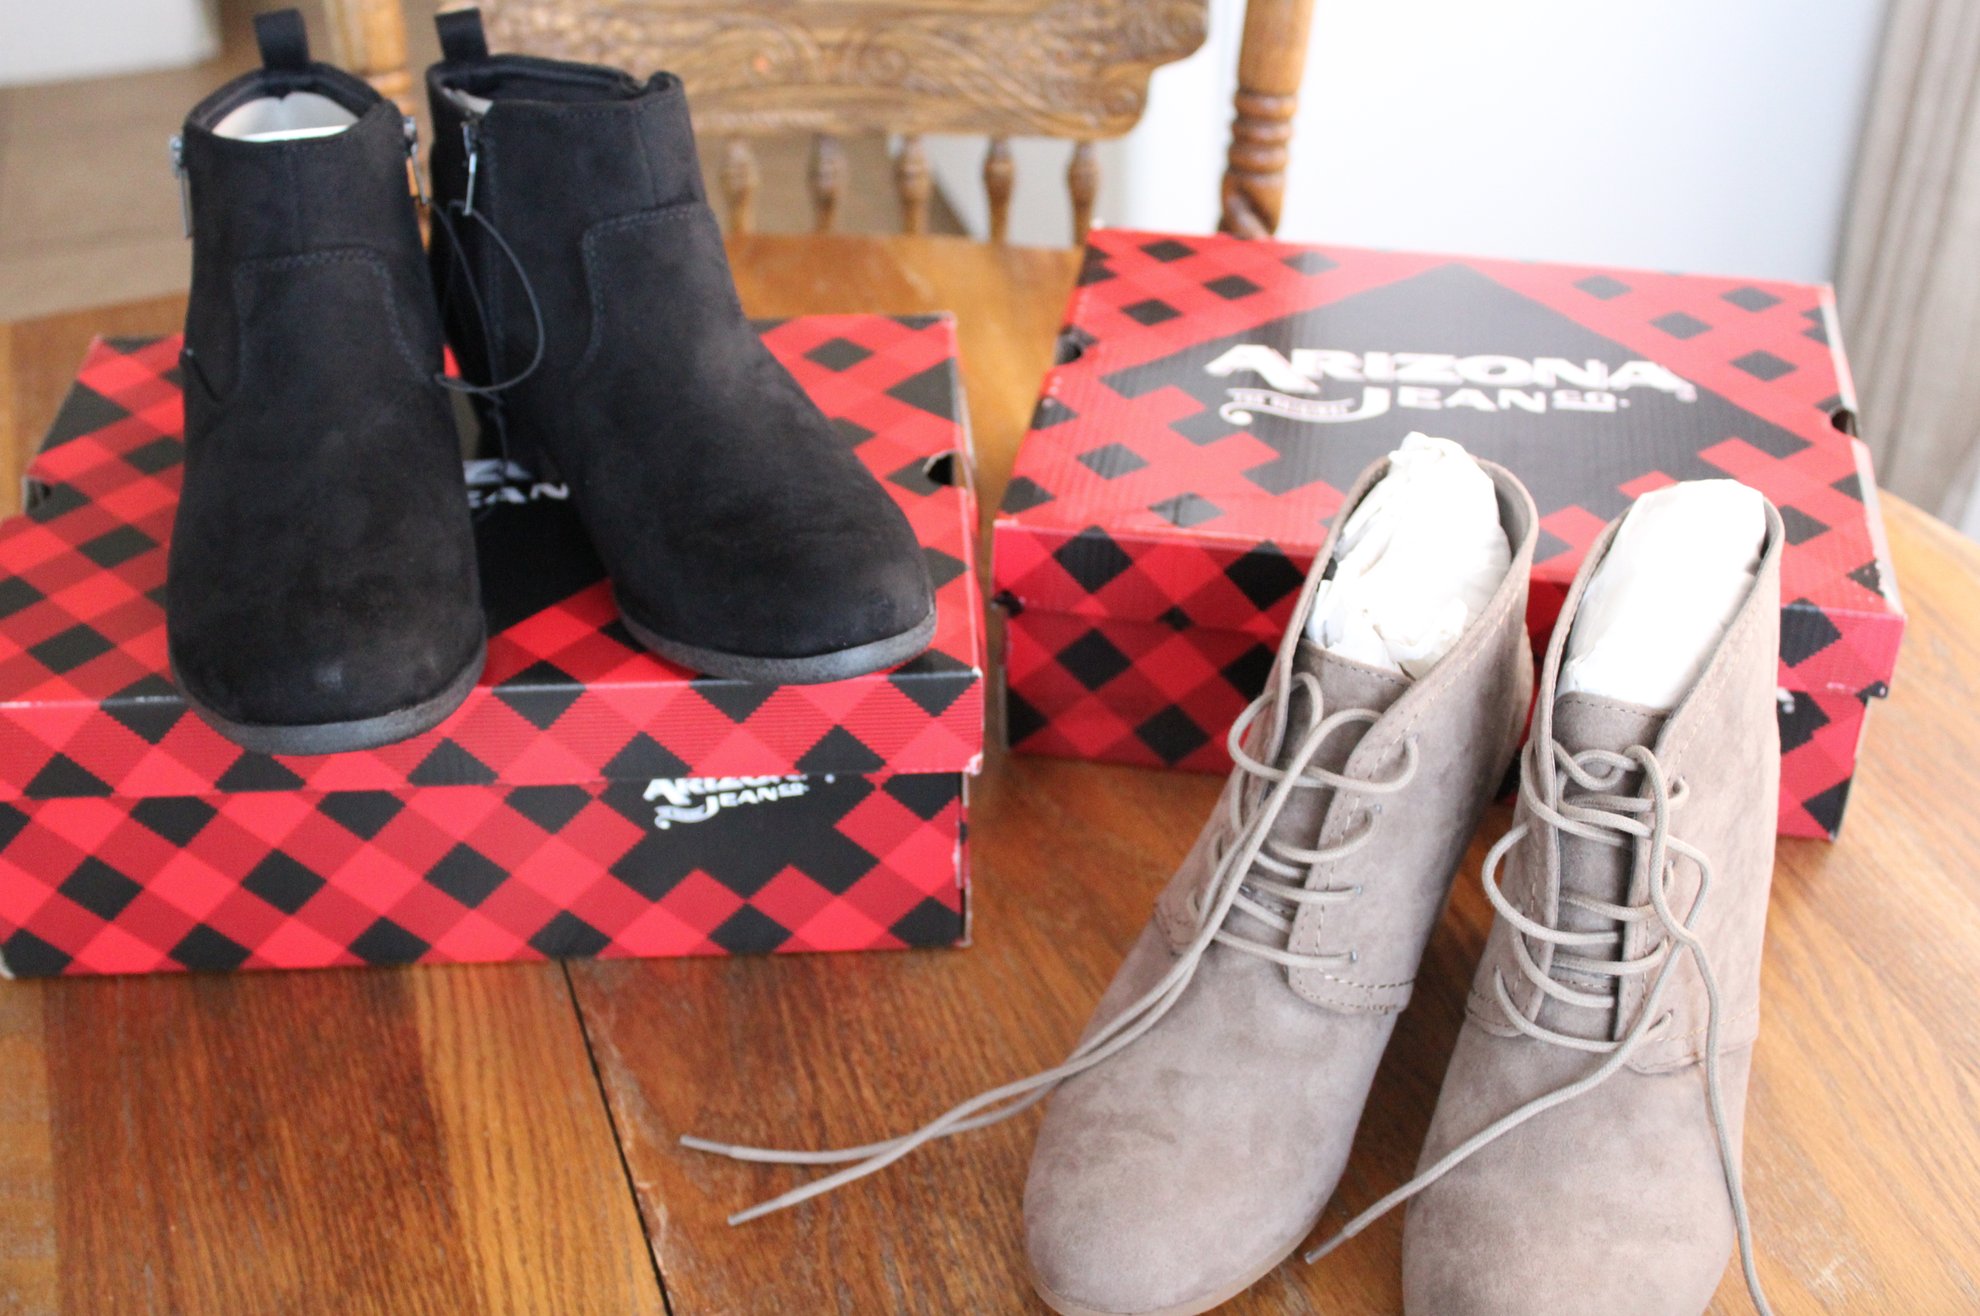 Get these boots for just $15 at JCPenney!